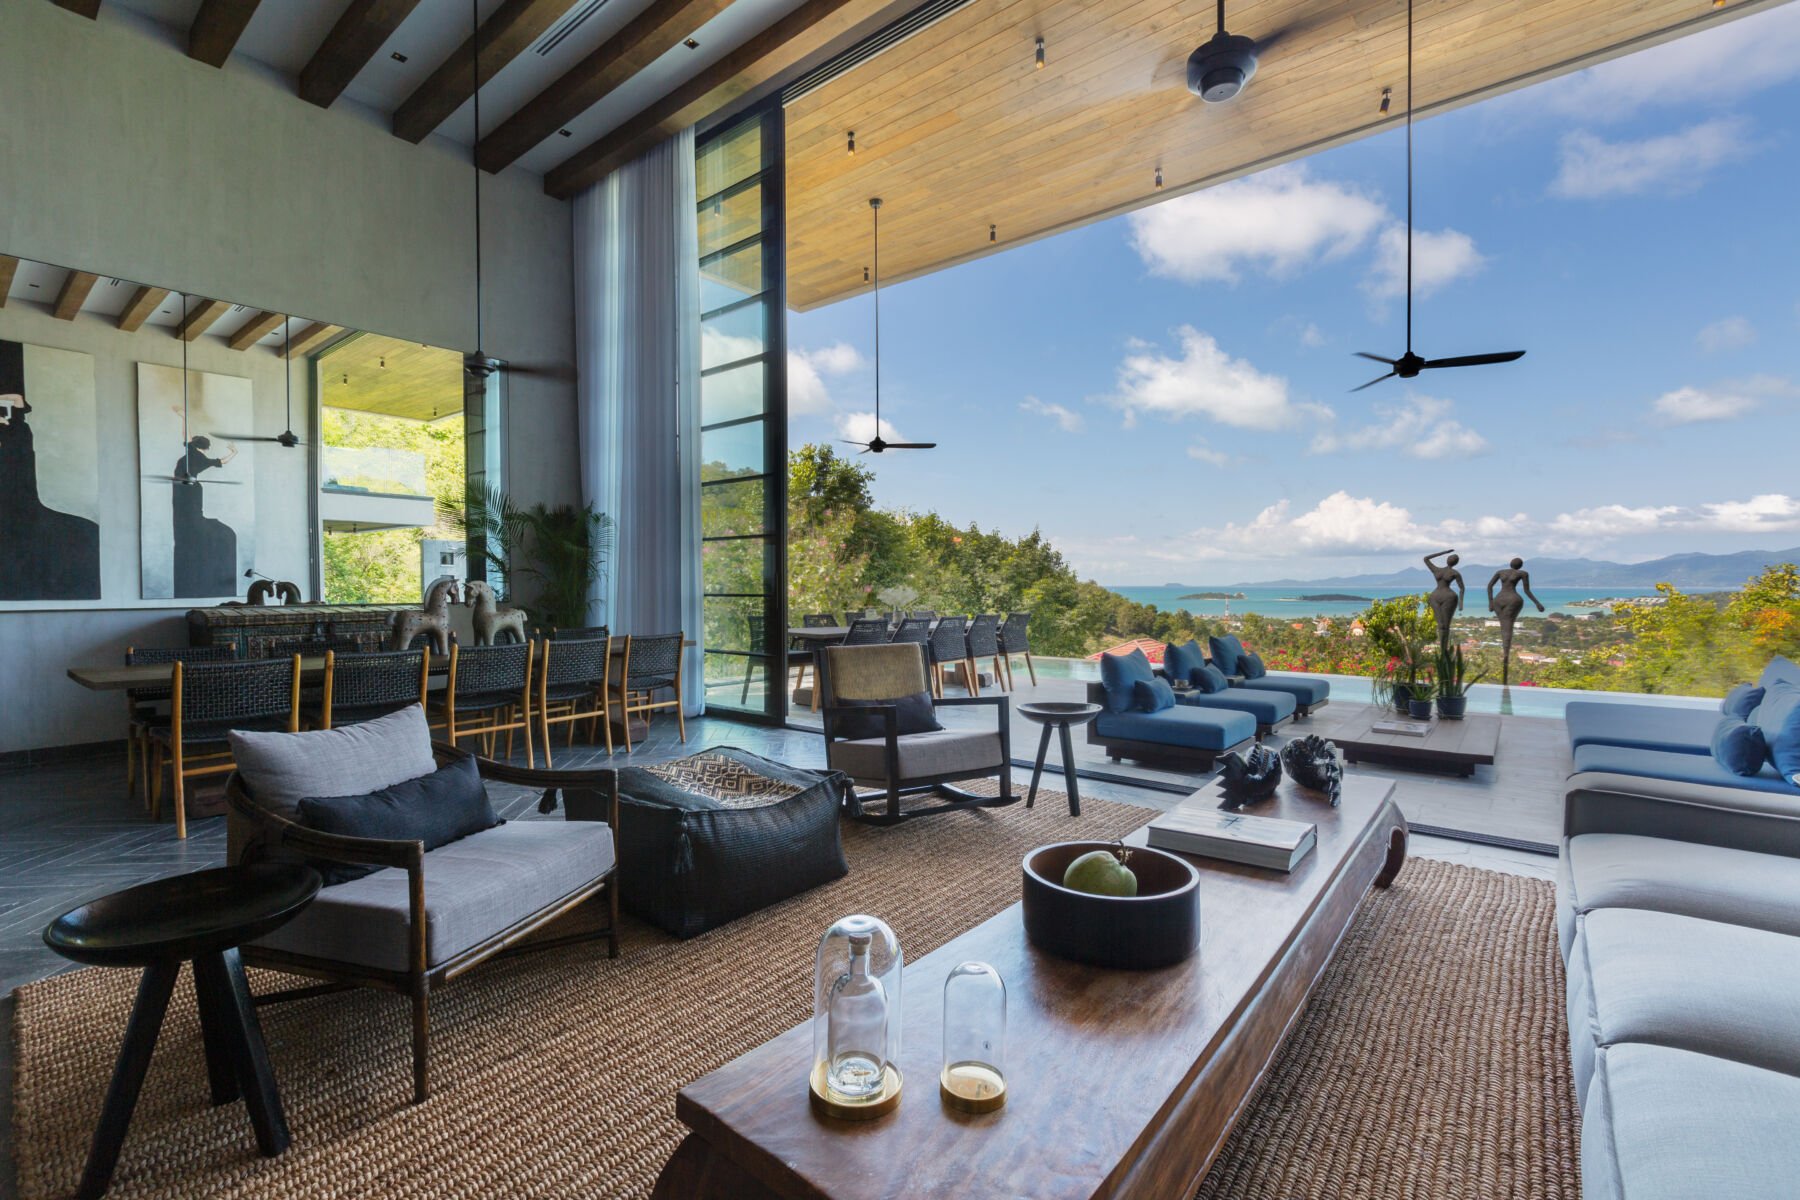 Living room at Villa Orca, a 4 bedroom ocean view villa with an additional self contained guest house located in Plai Laem, Koh Samui, Thailand